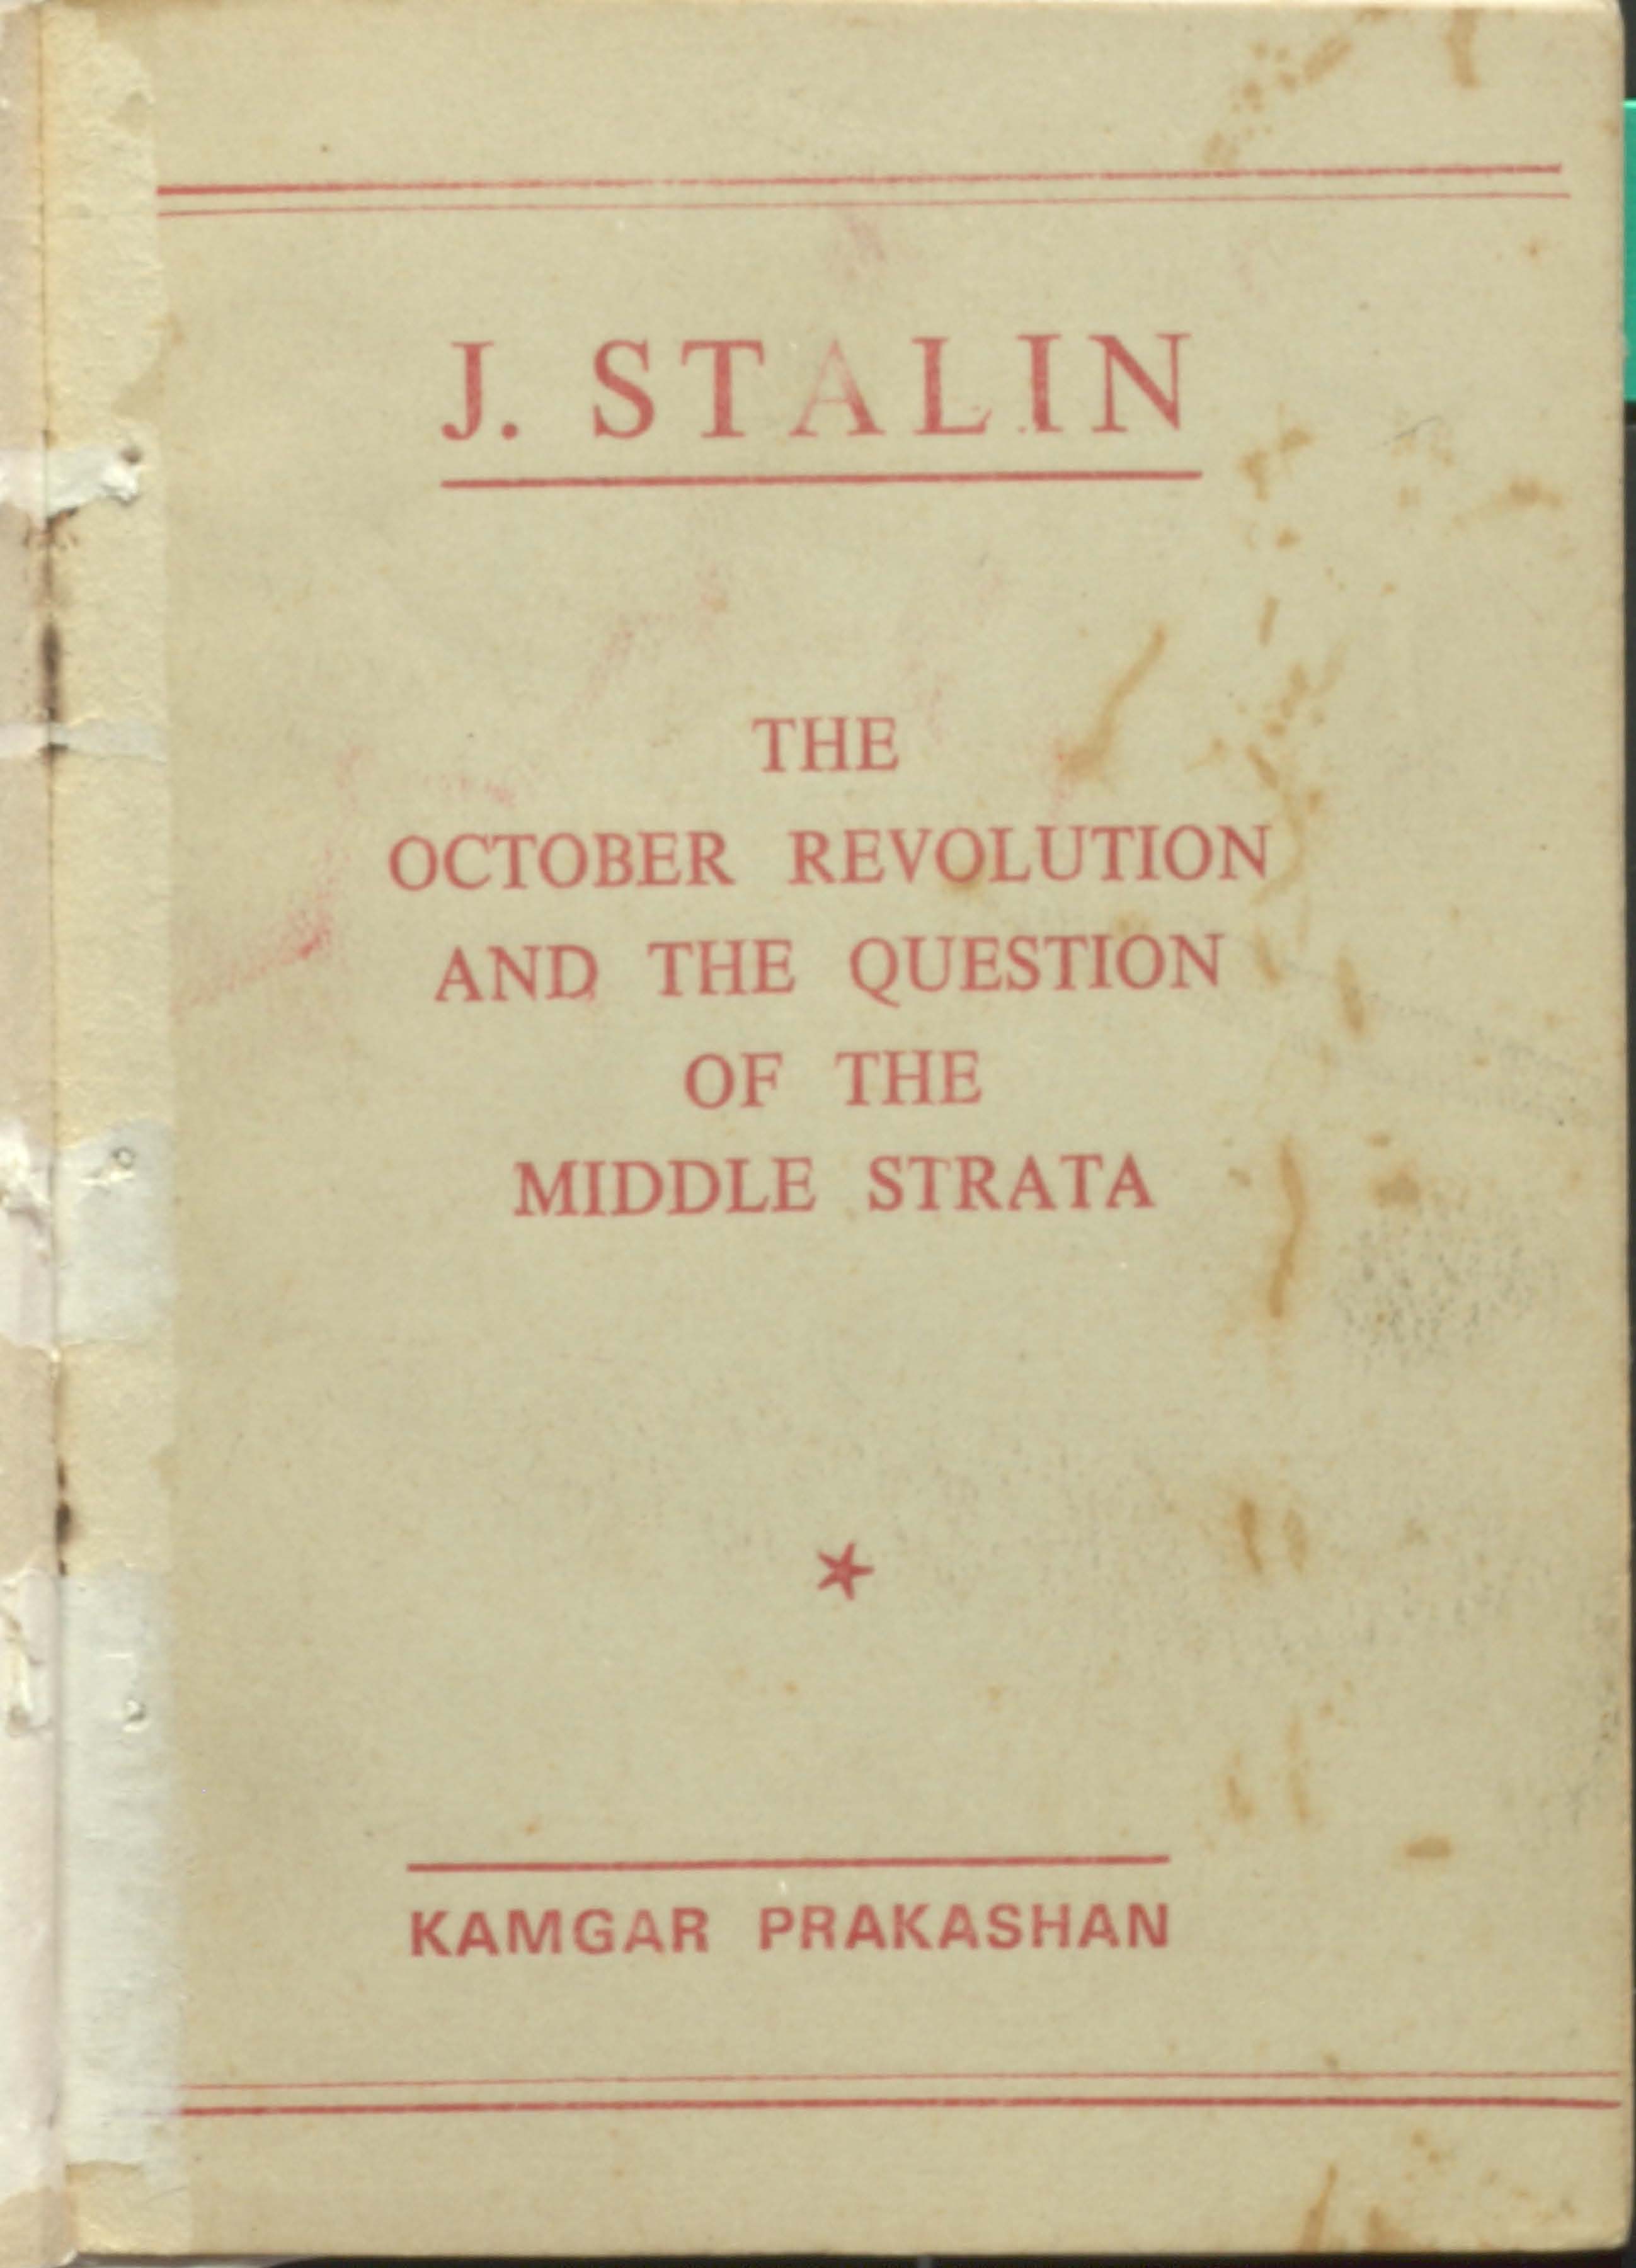 The October Revolution and the Question of the Middle Strata